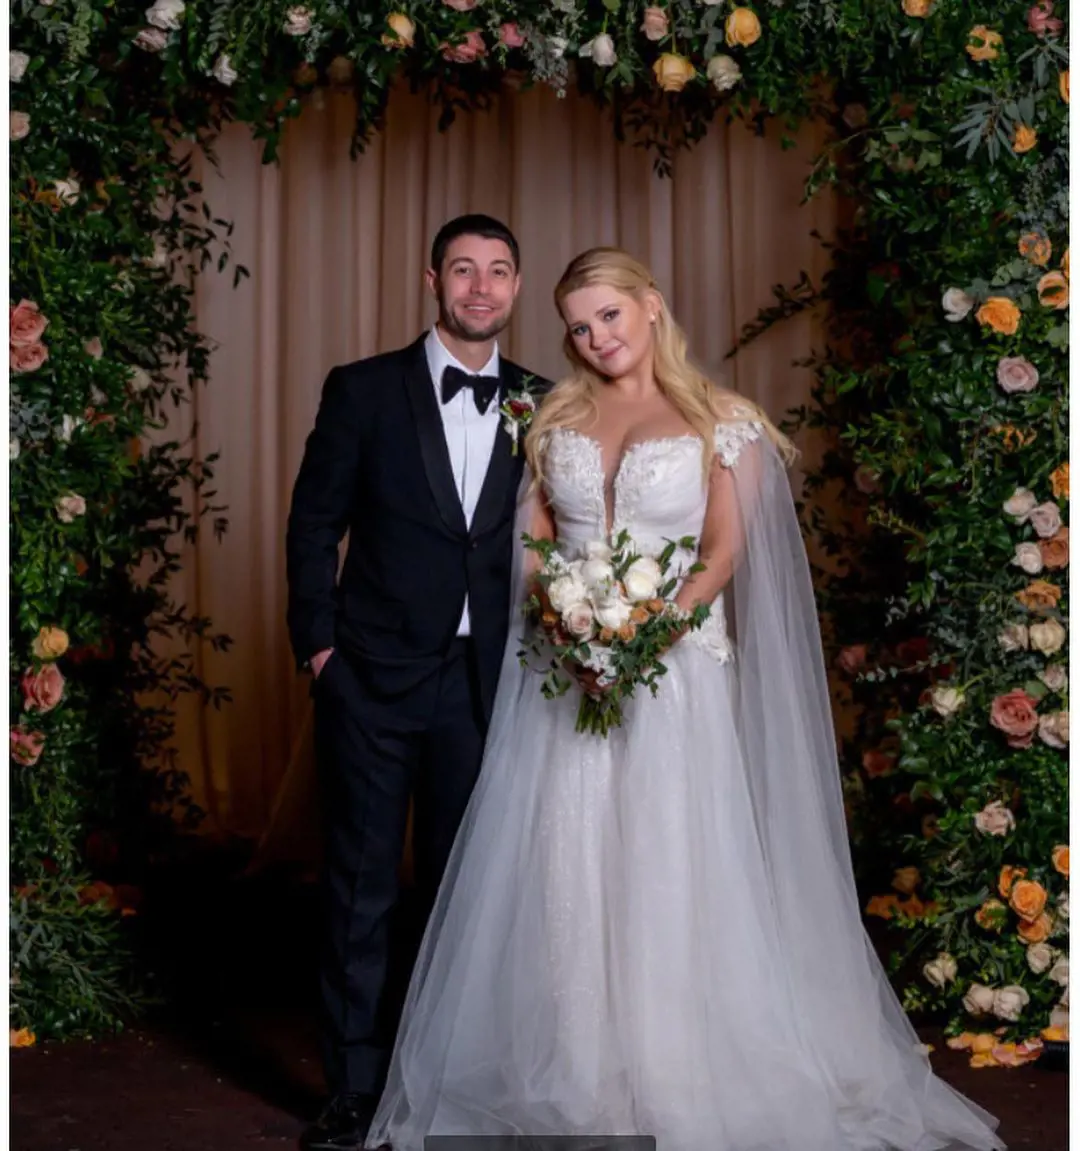 Abigail and her groom Ira looks stunningly gorgeous on their wedding day held at Hummingbird Nest Events in January